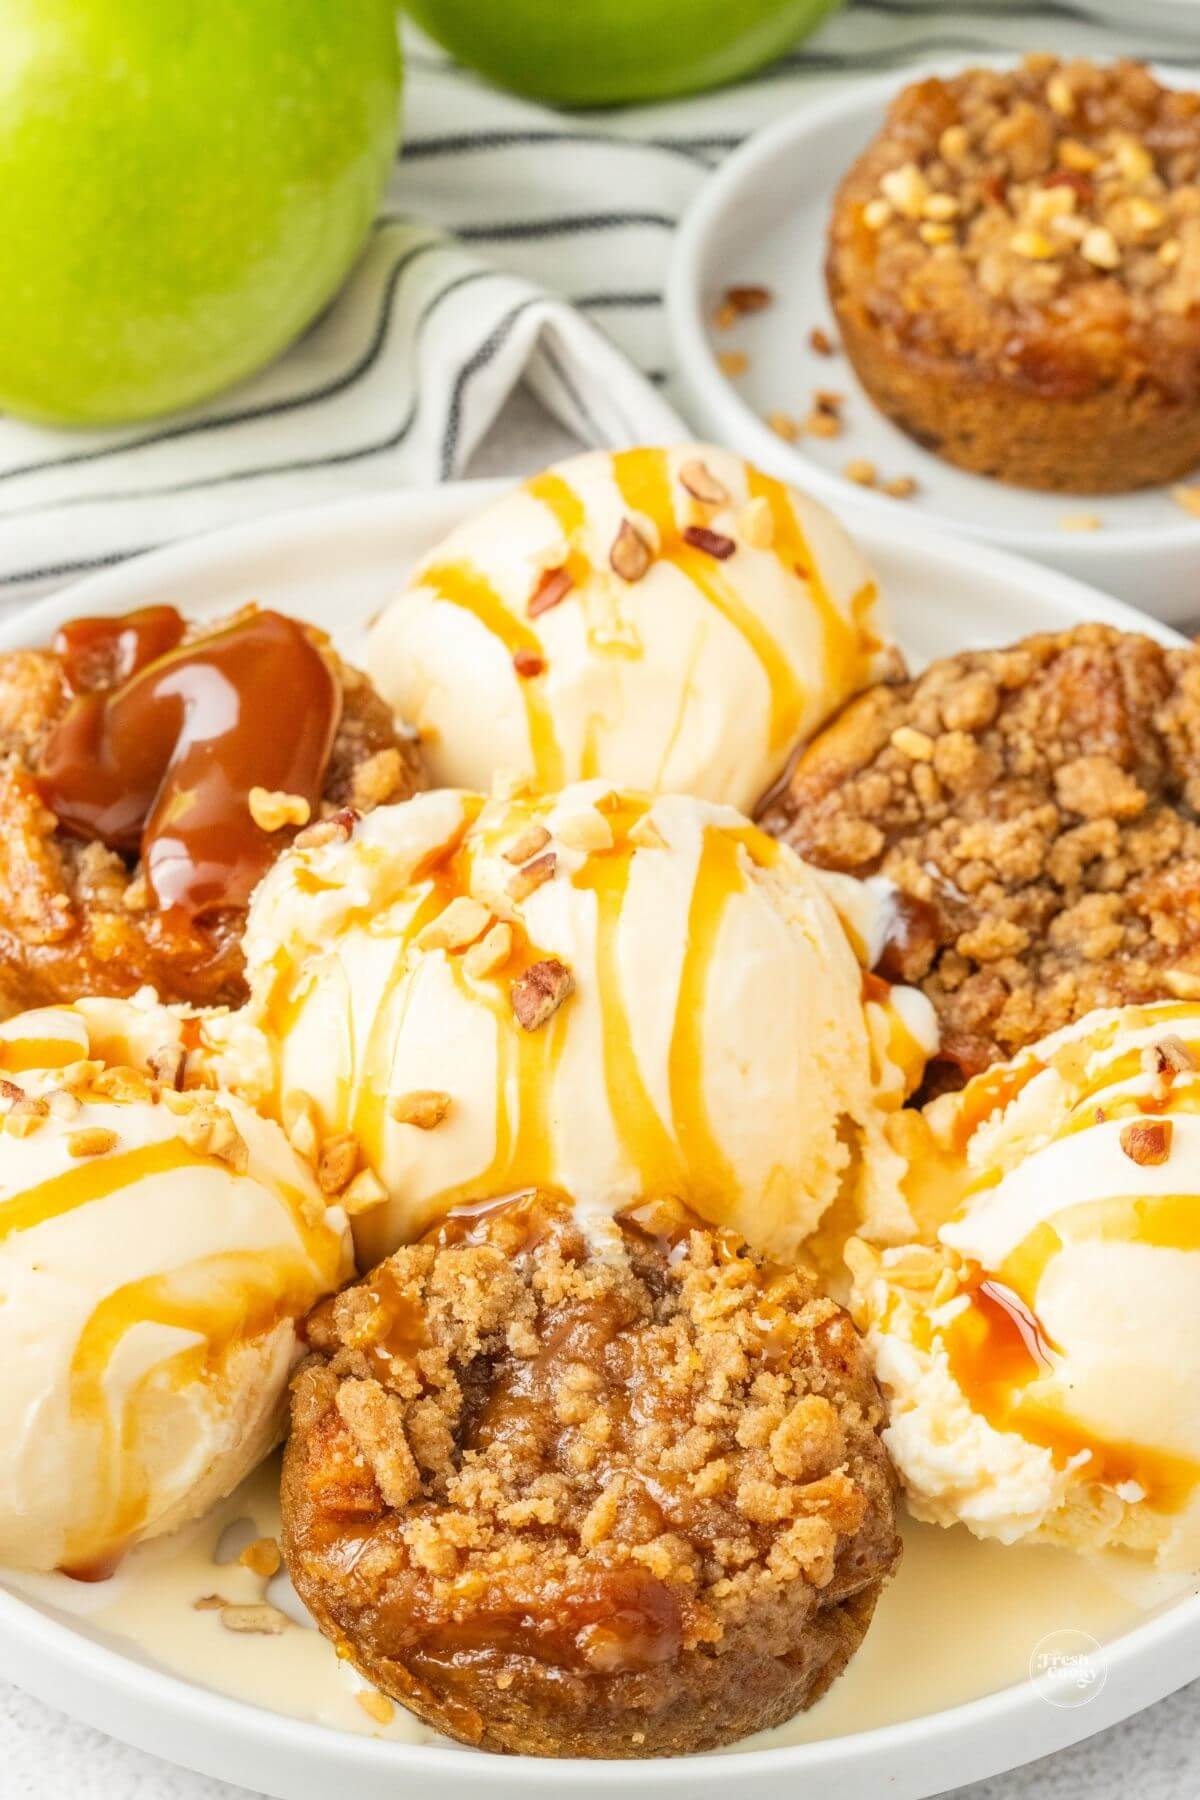 Mini apple pies on plate with vanilla ice cream, drizzled with caramel sauce.